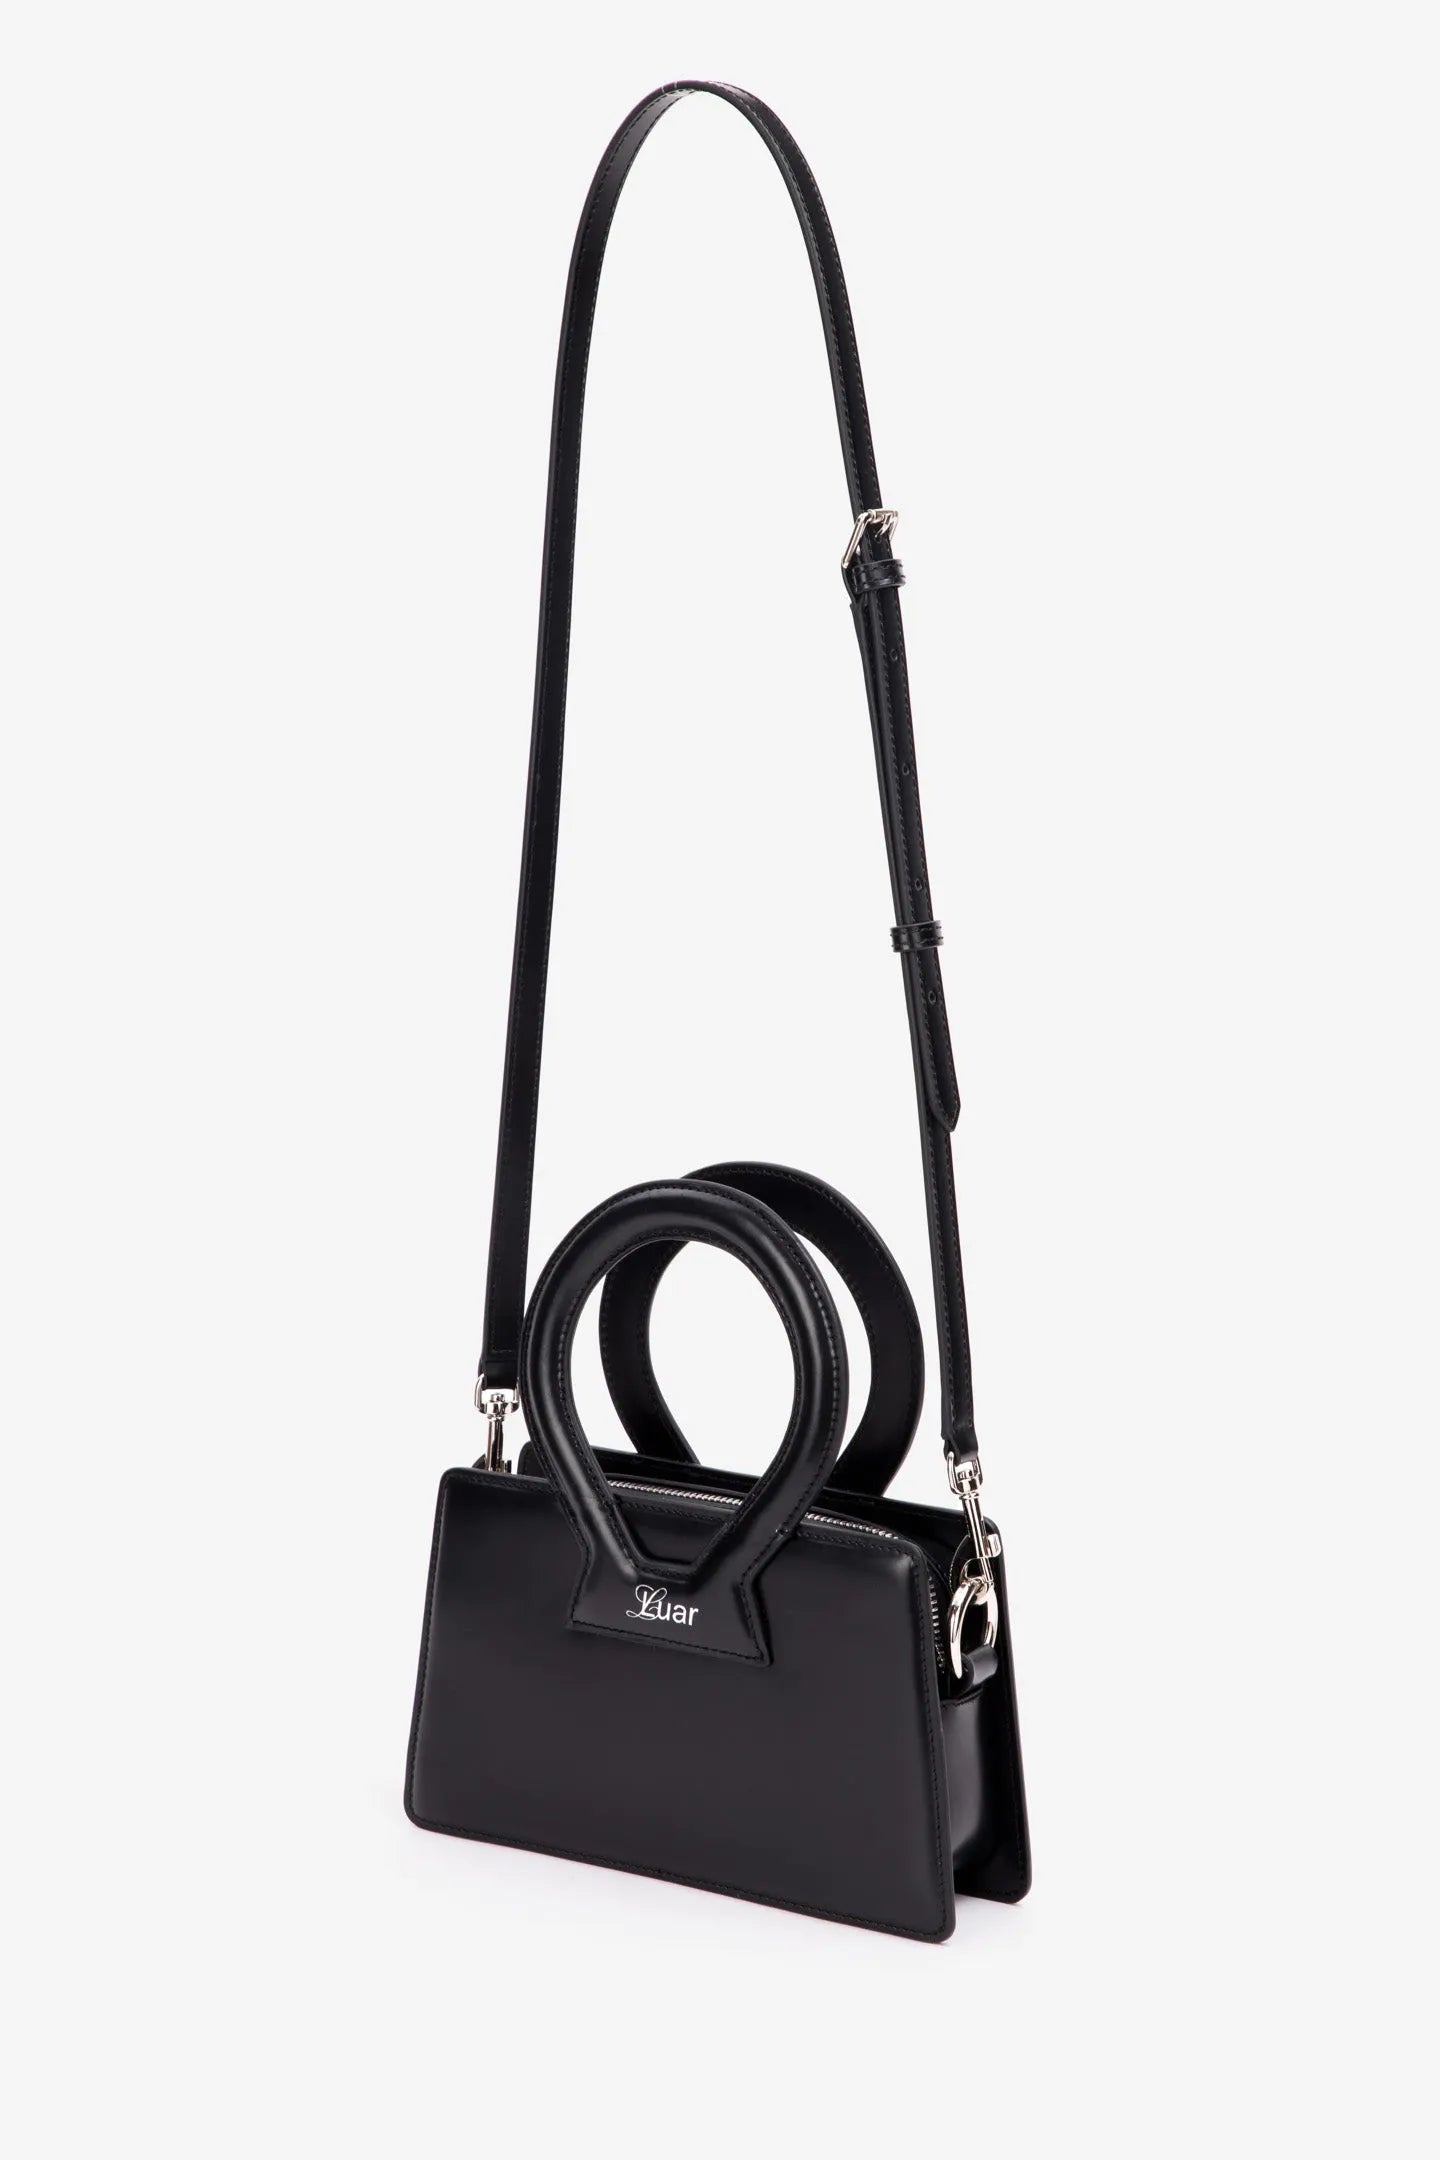 Black Small Ana Bag by Luar – Possession Obsession